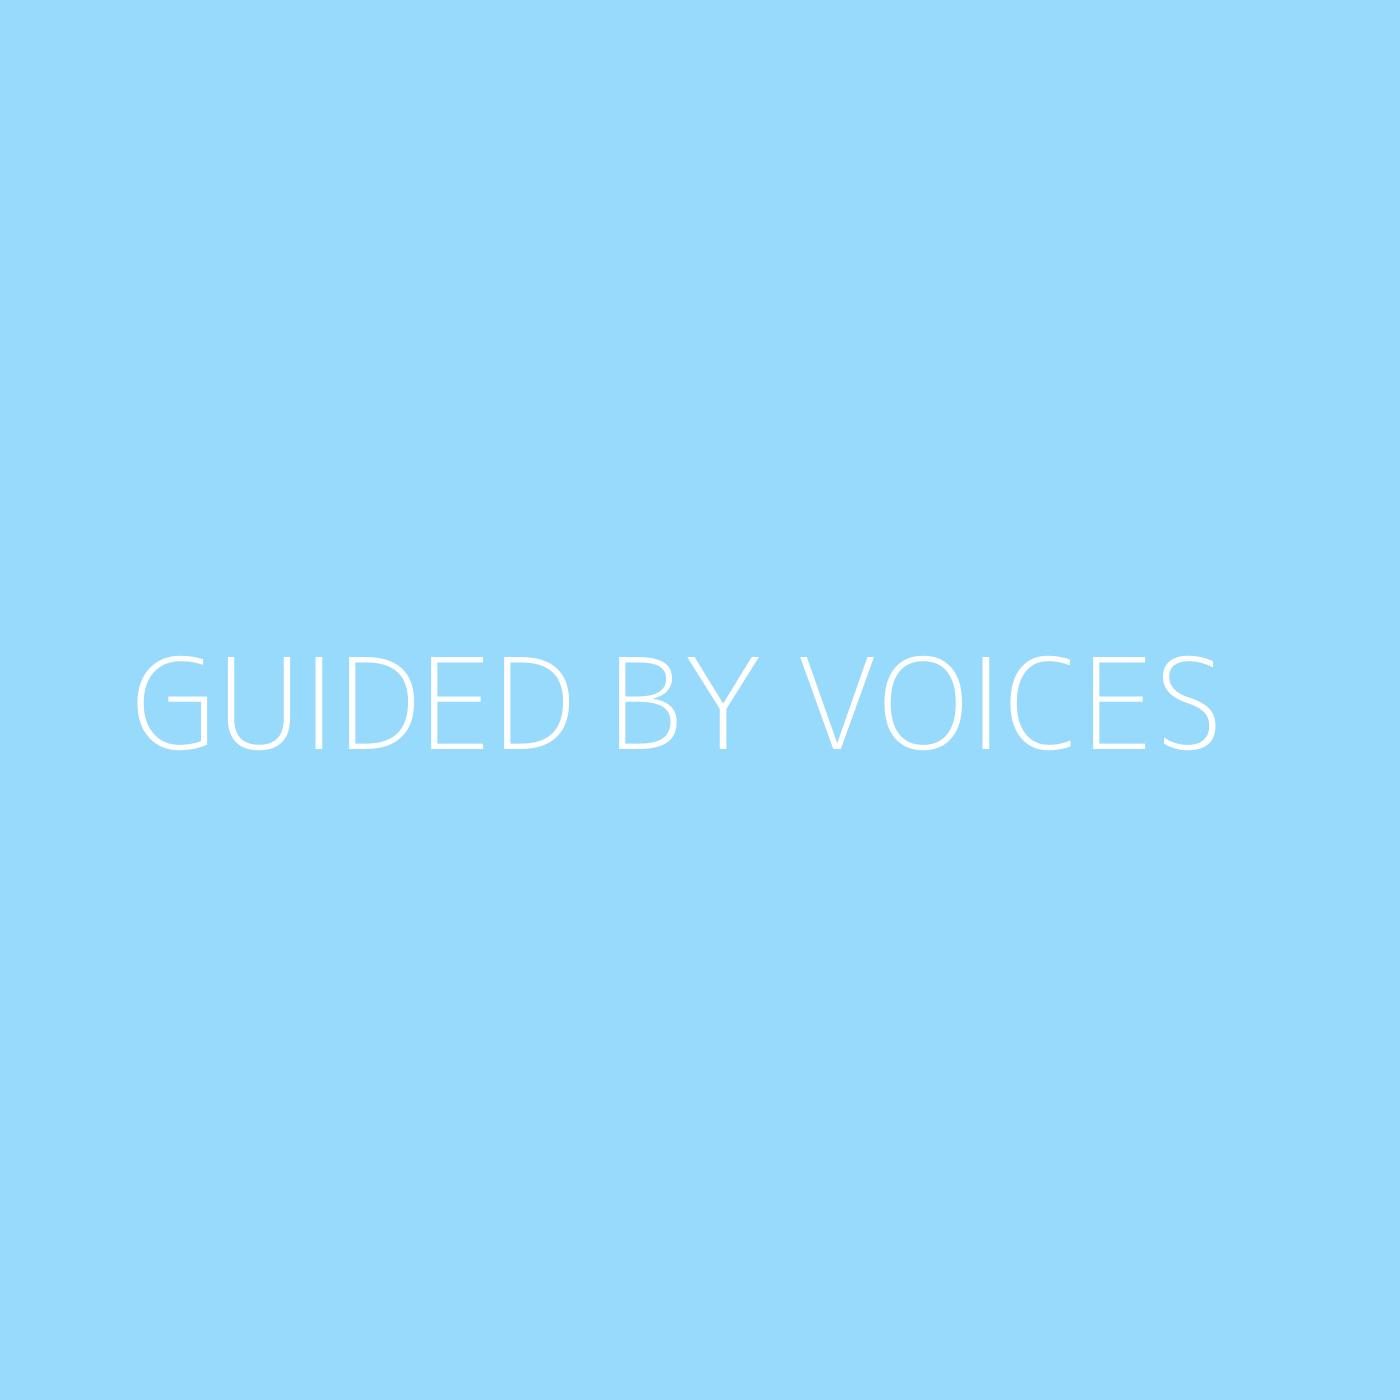 Guided By Voices Playlist Artwork